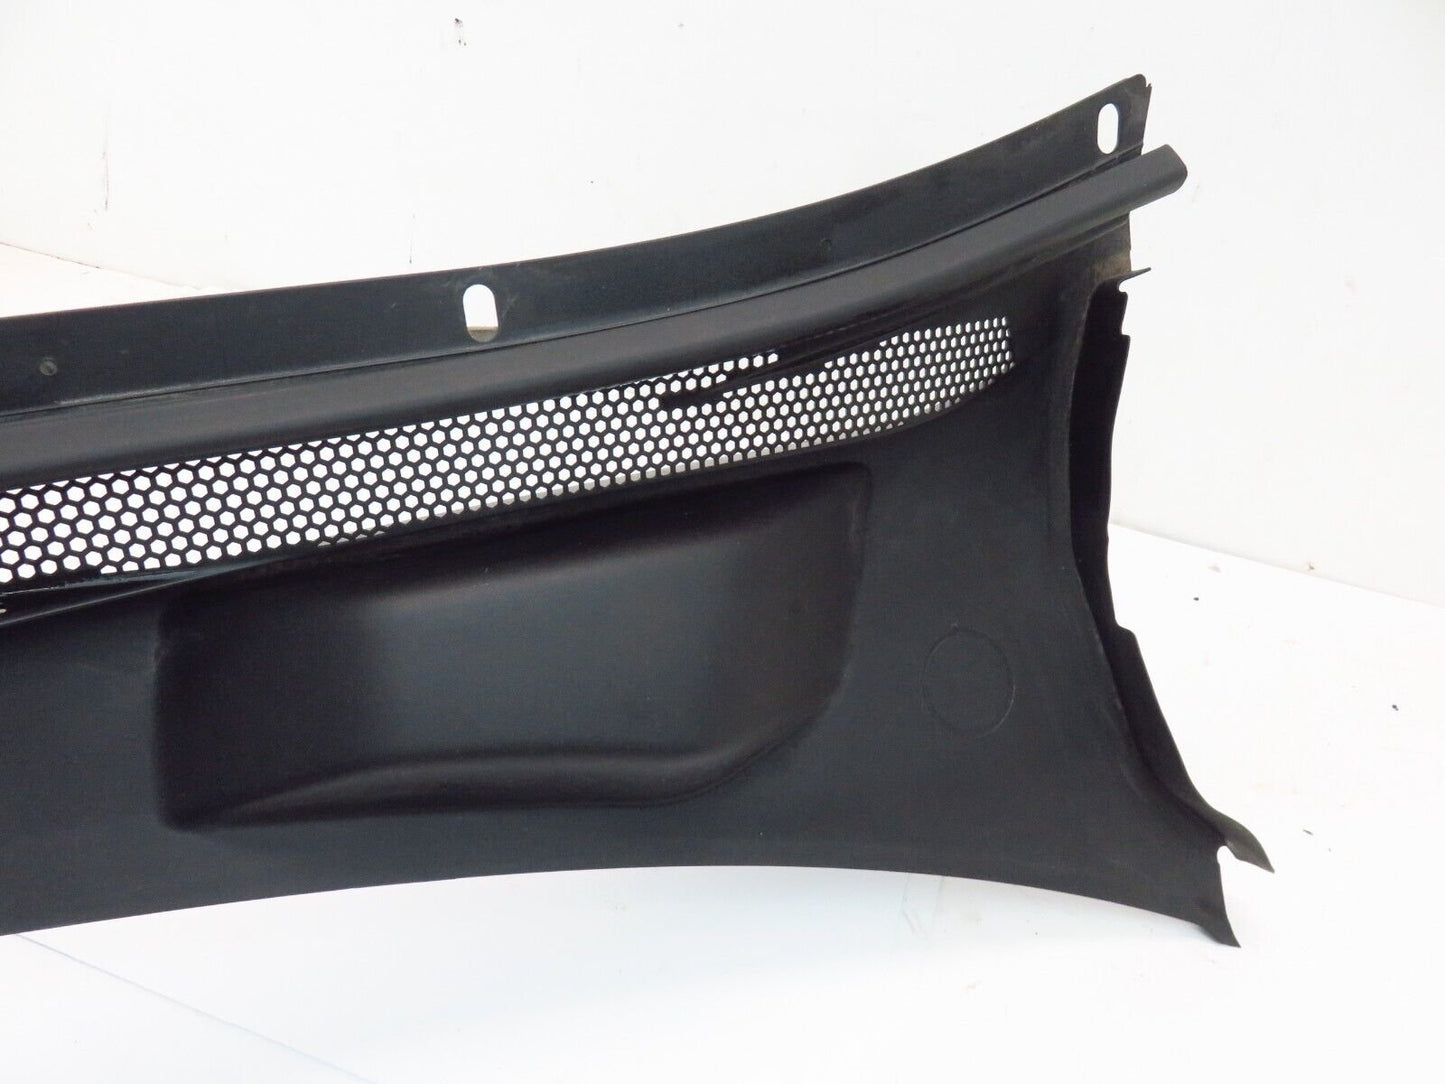 2018-2020 Buick Regal TourX Wiper Cowl Panel Grille Front OEM 18 19 20